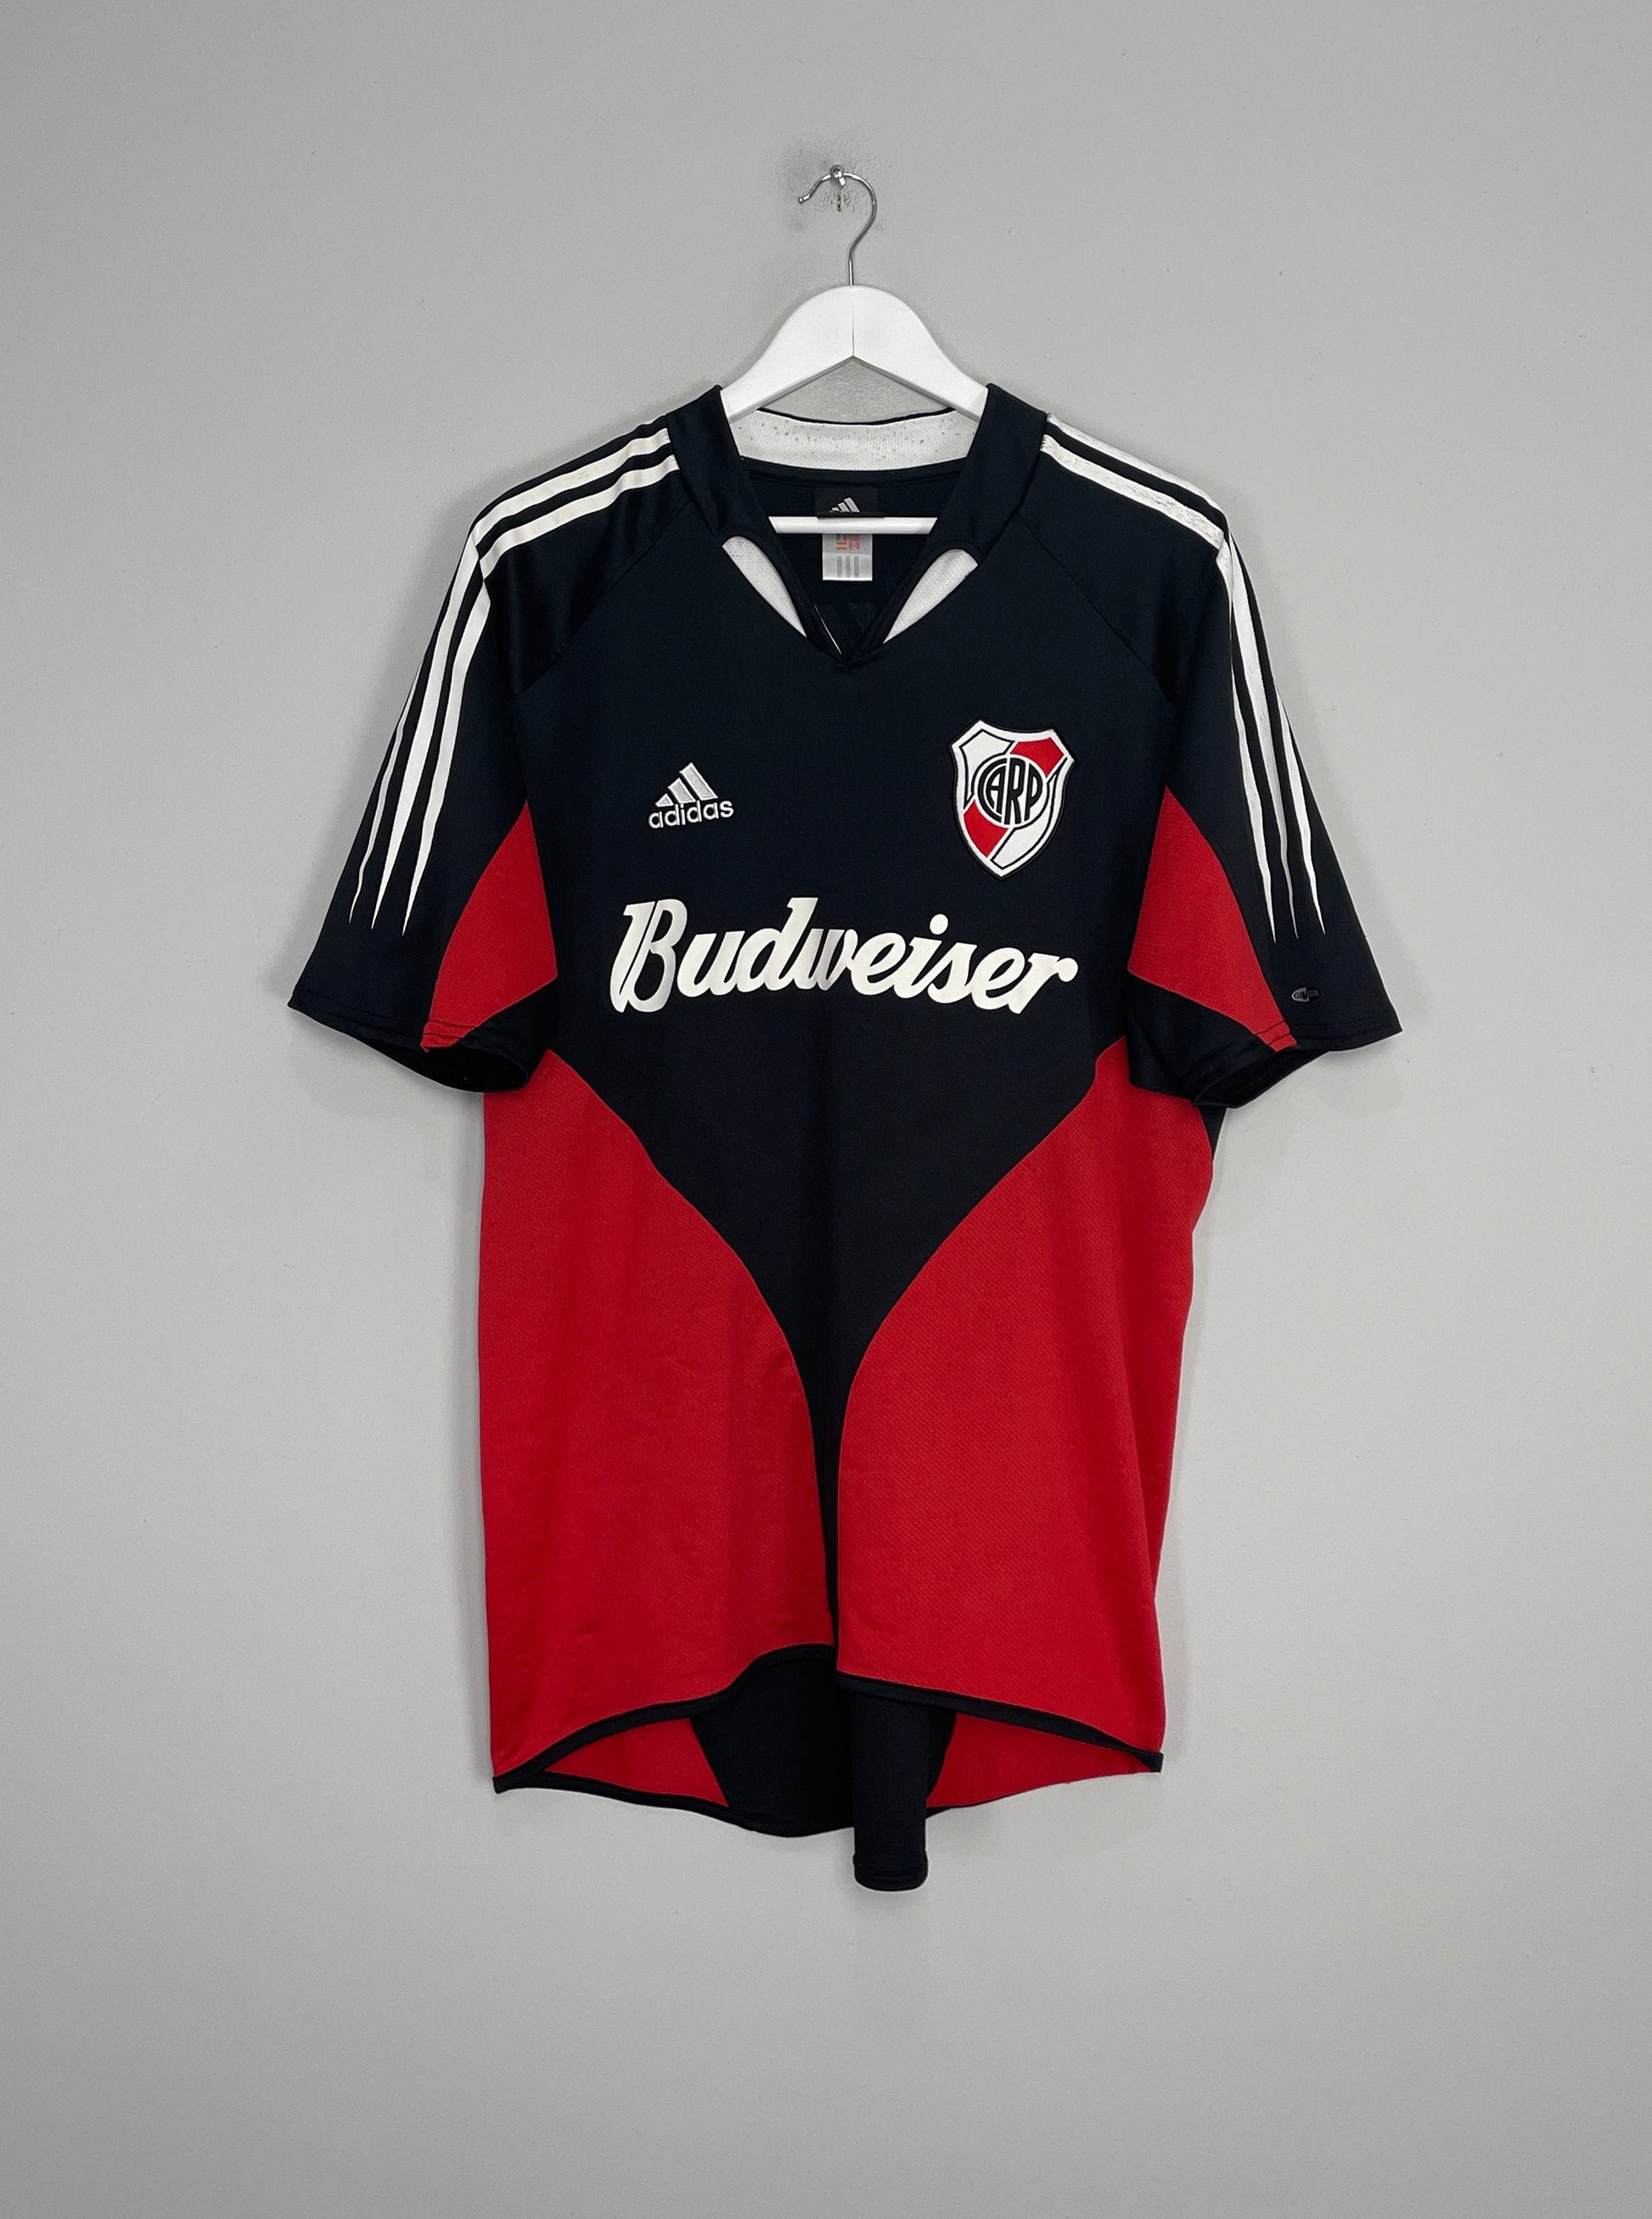 Image of the River Plate shirt from the 2004/05 season